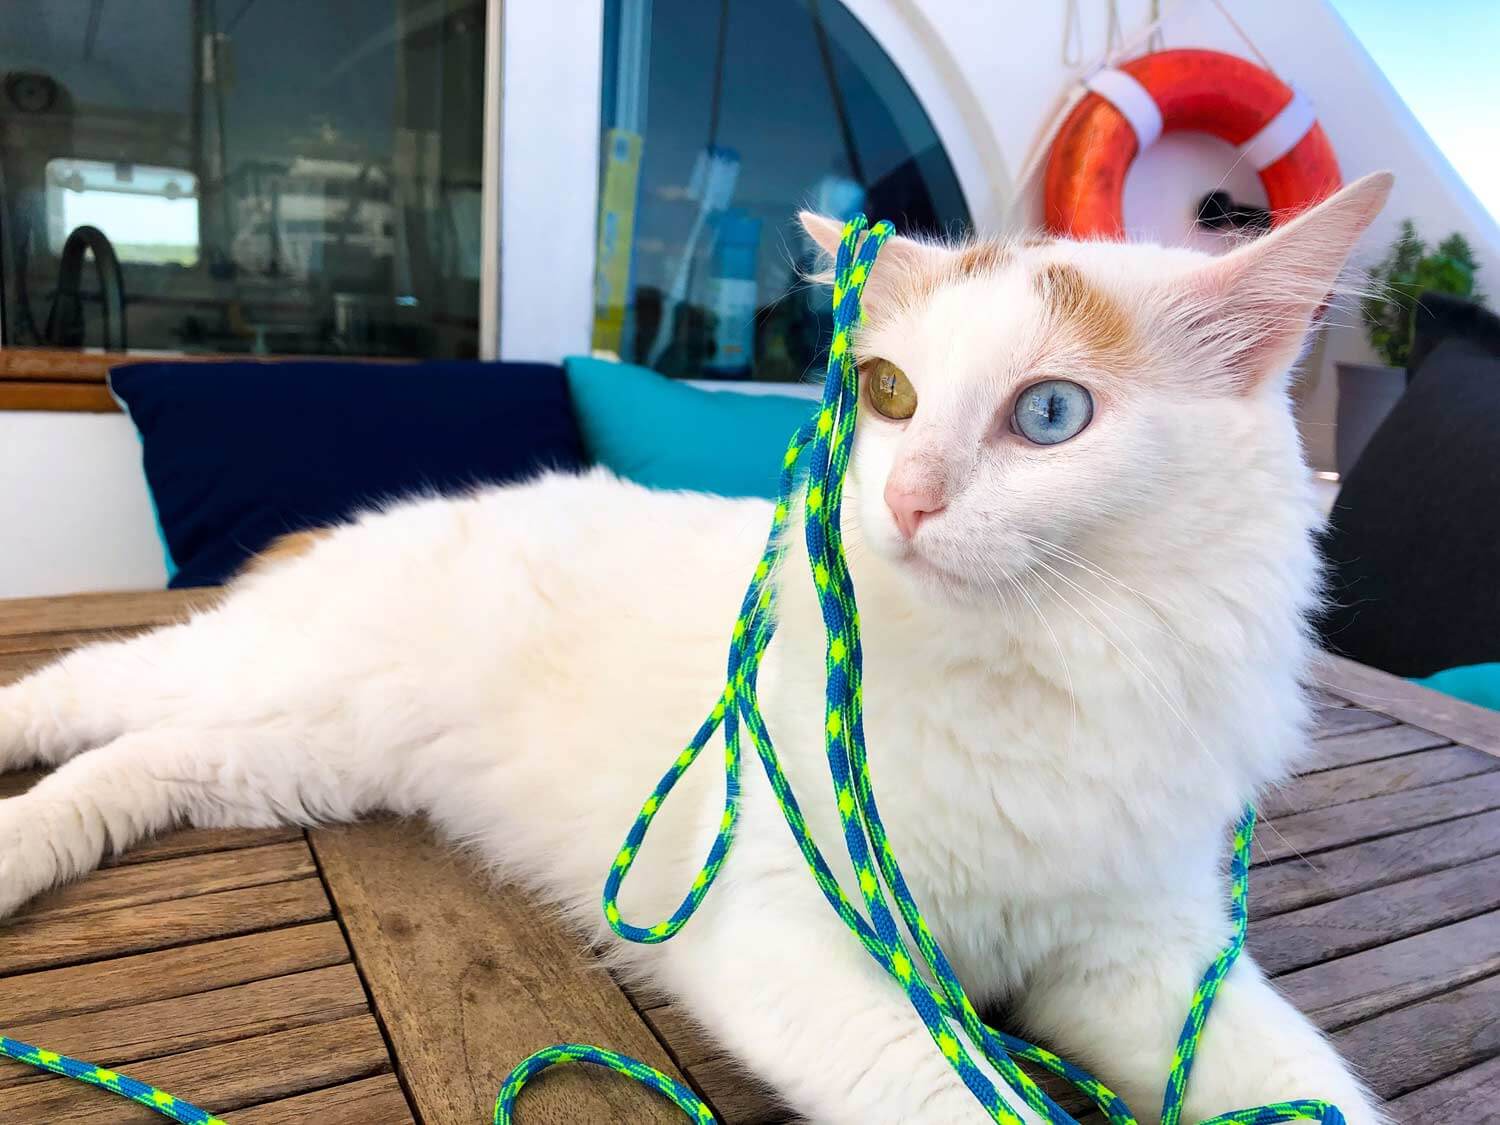 "Funny photo of feline crew of SV Sunnyside with sailing lines draped over his head